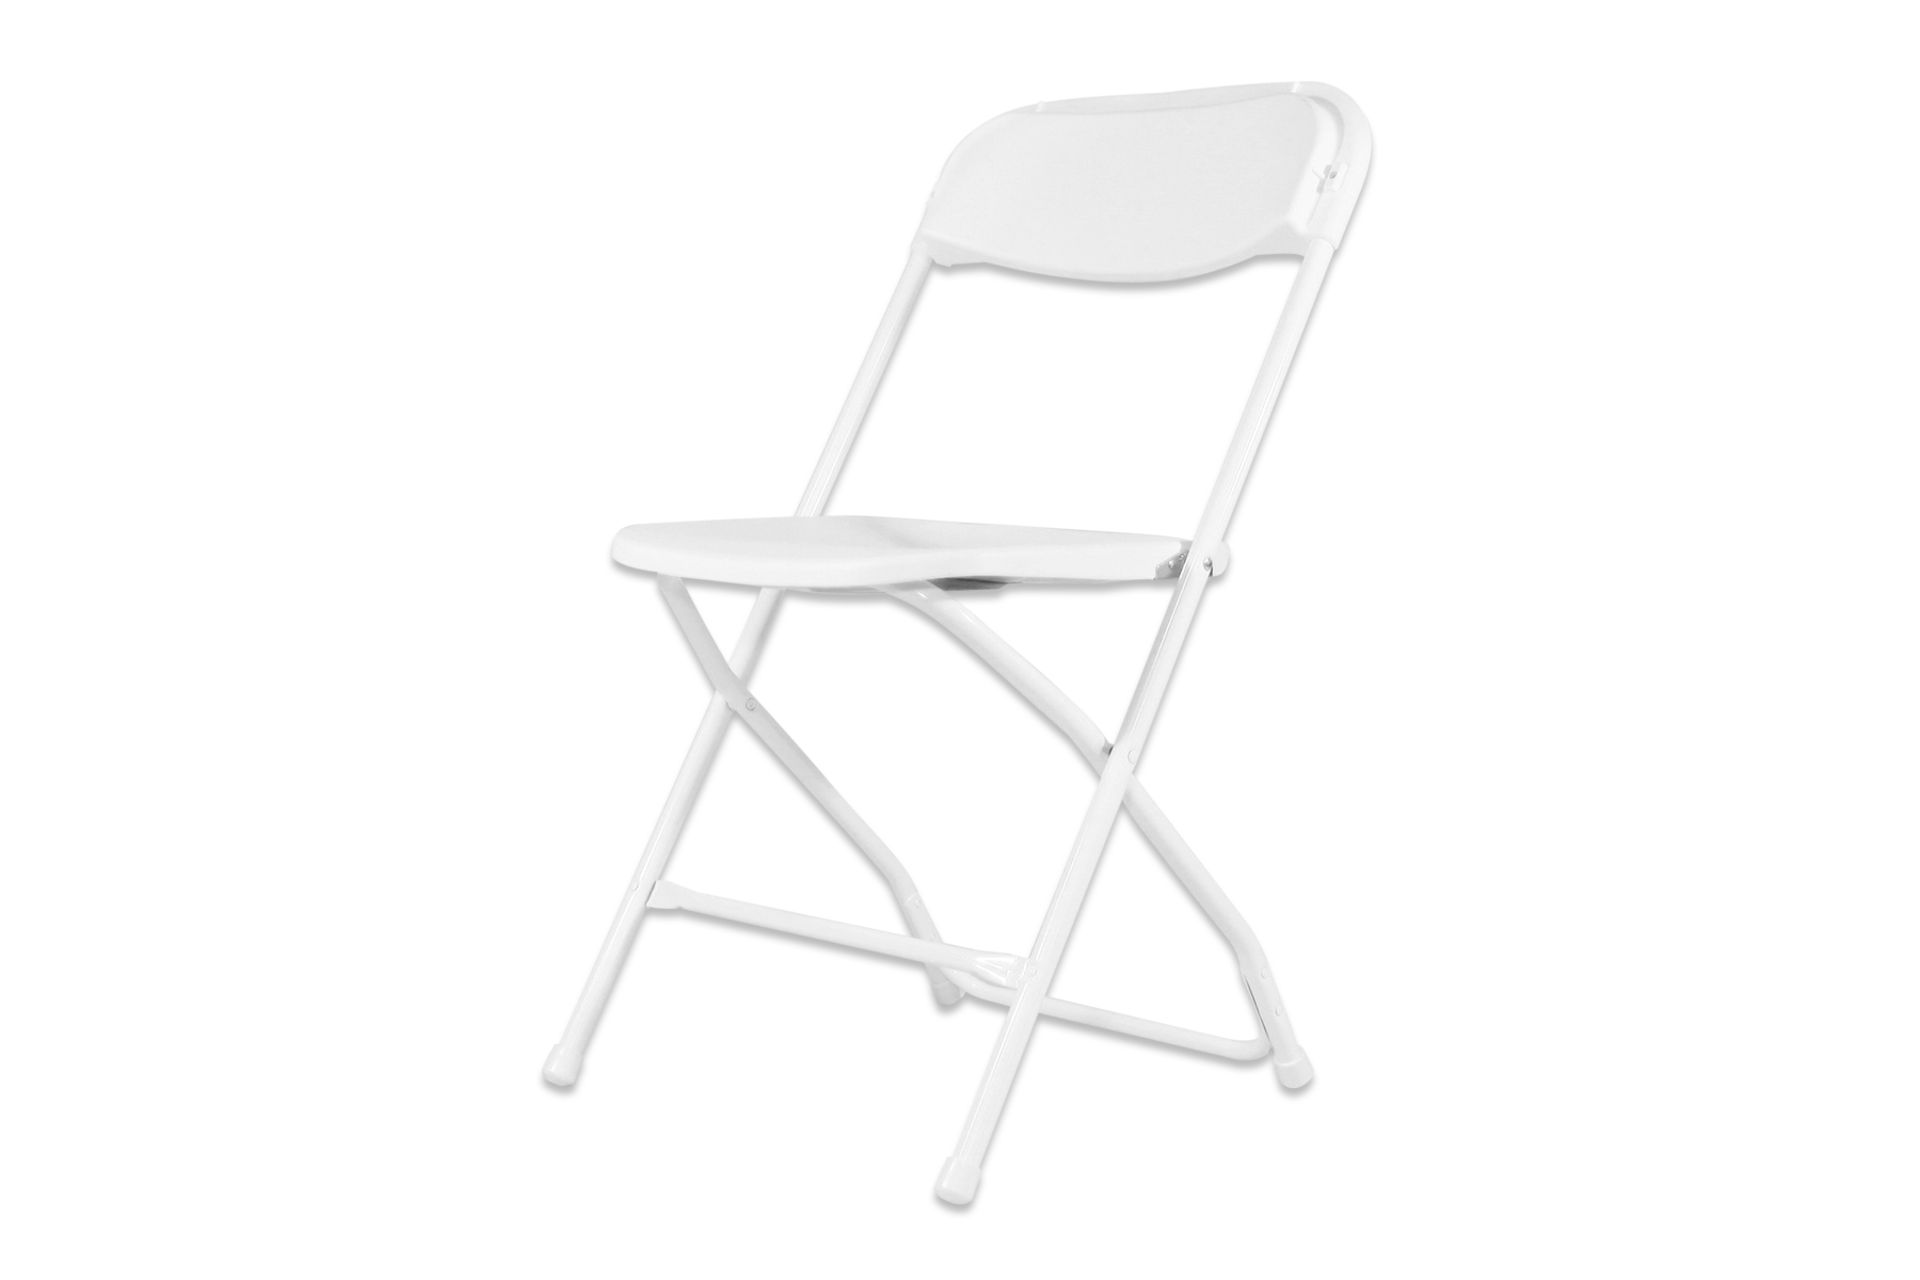 V *TRADE QTY* Grade A Folding Plastic Chair - White X180 YOUR BID PRICE TO BE MULTIPLIED BY ONE